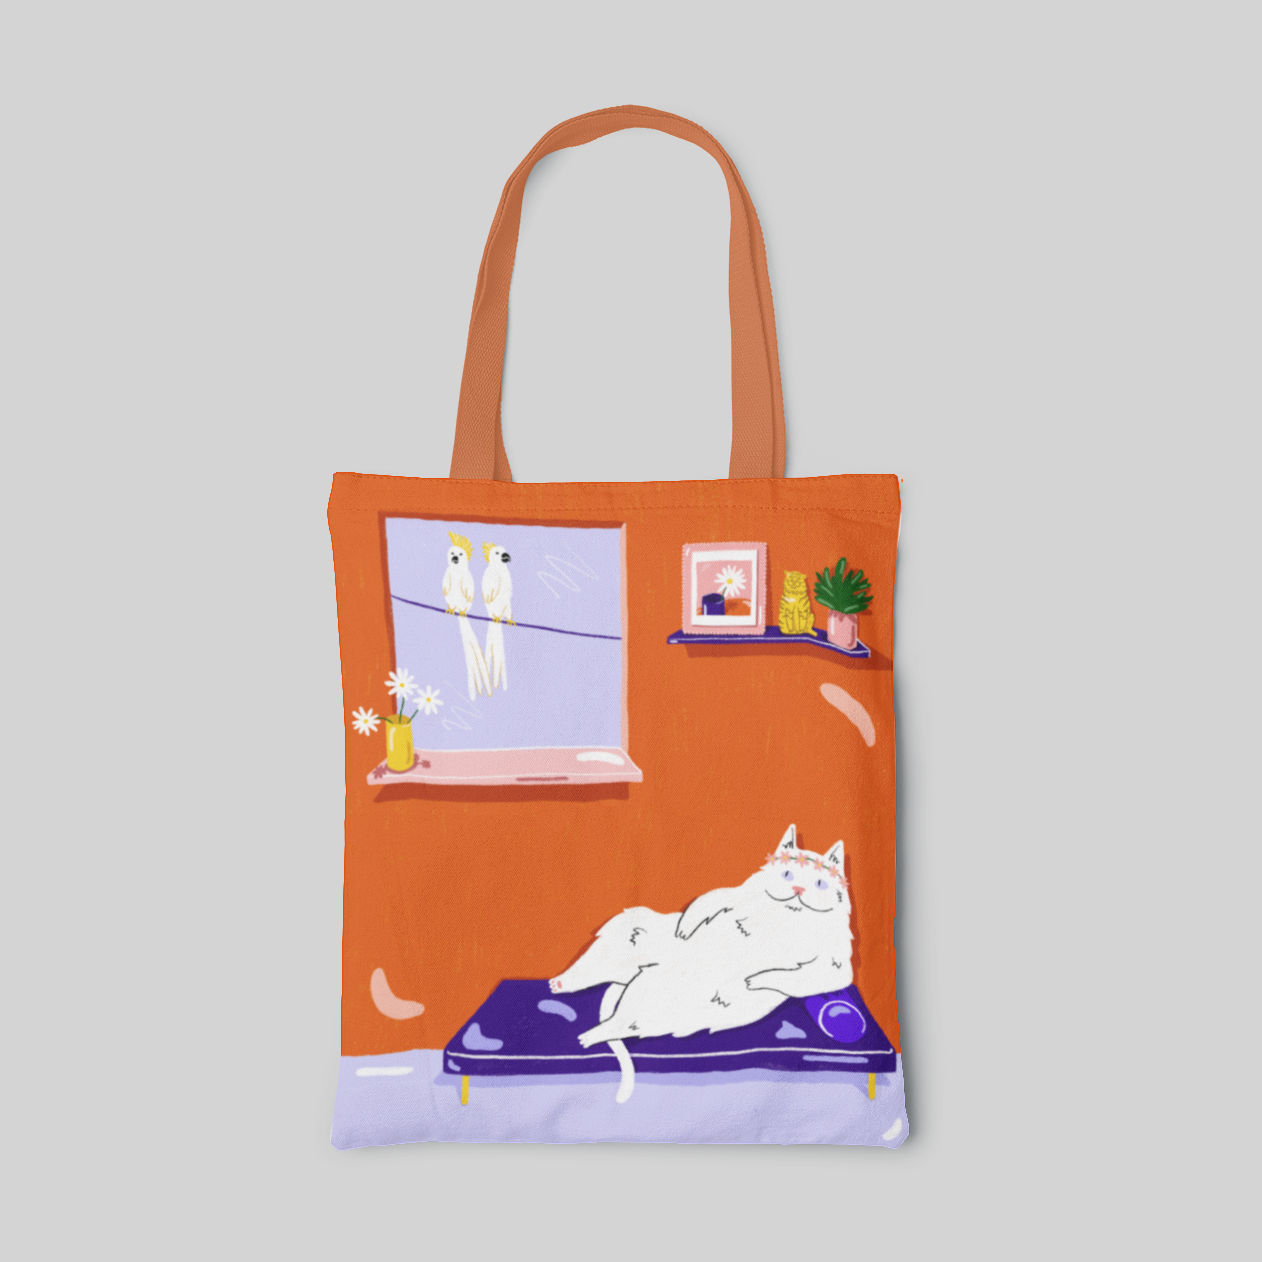 Orange animal designed tote bag with white cat lying on the bed and two white birds on the window, front side